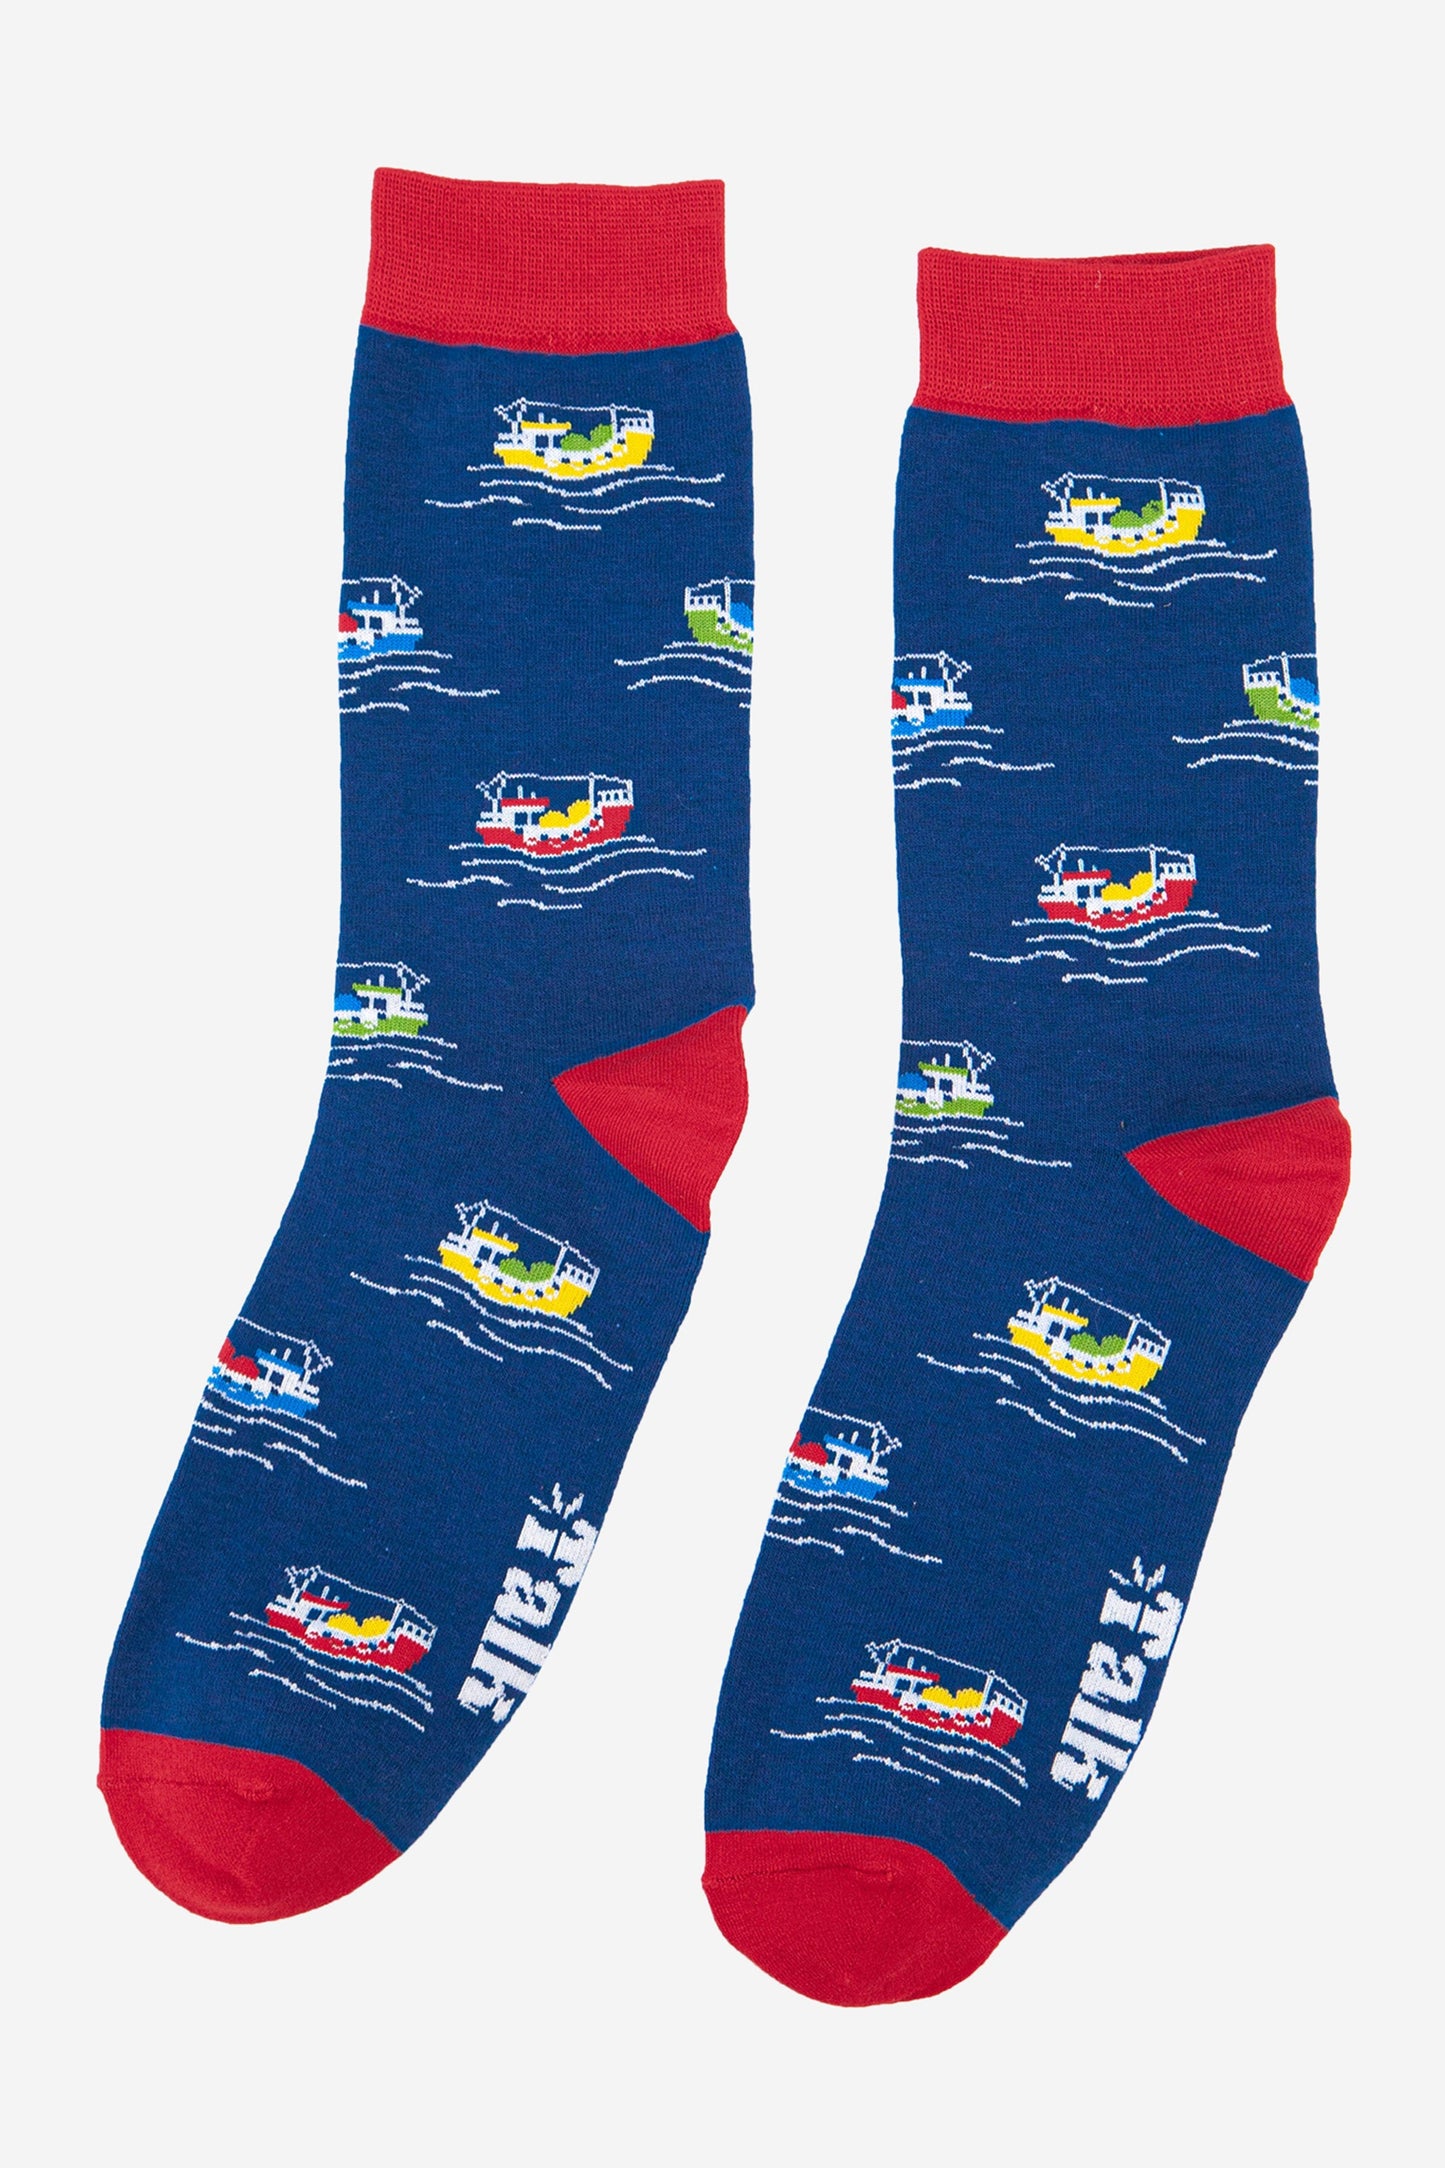 mens banboo fishermen's boat pattern bamboo socks in blue and red